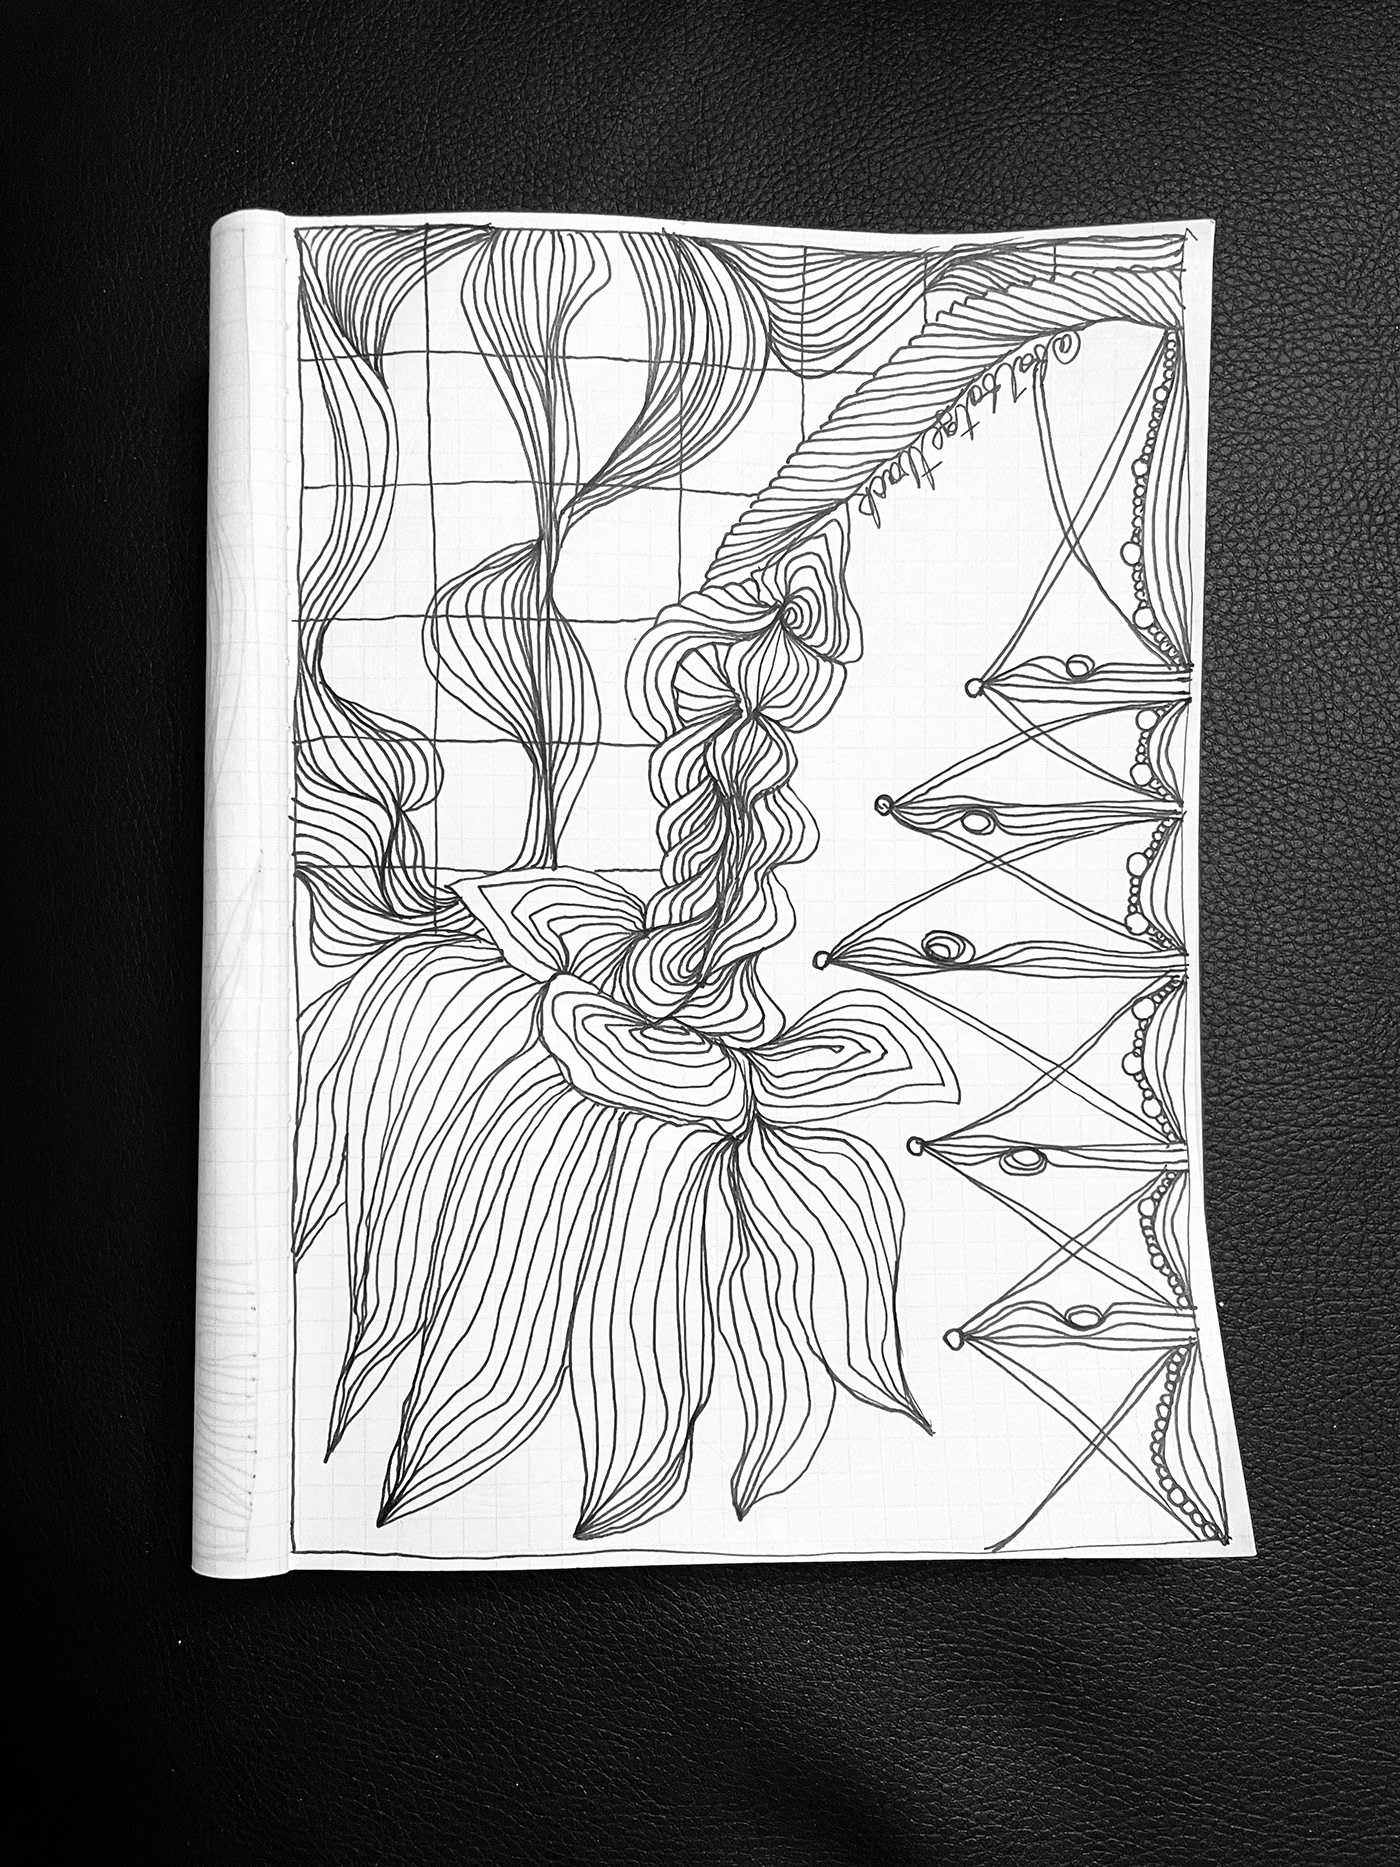 linework linedrawing blackpen blackandwhite abstractart monster OnceUponaTime universe OUTTASPACE Zendoodle sketch quicksketch dailysketch pendrawing art pieces backtopaper BeingHuman fatfatgetback handdrawings lineart linedoodle paperdrawing penandpaper   recording memories